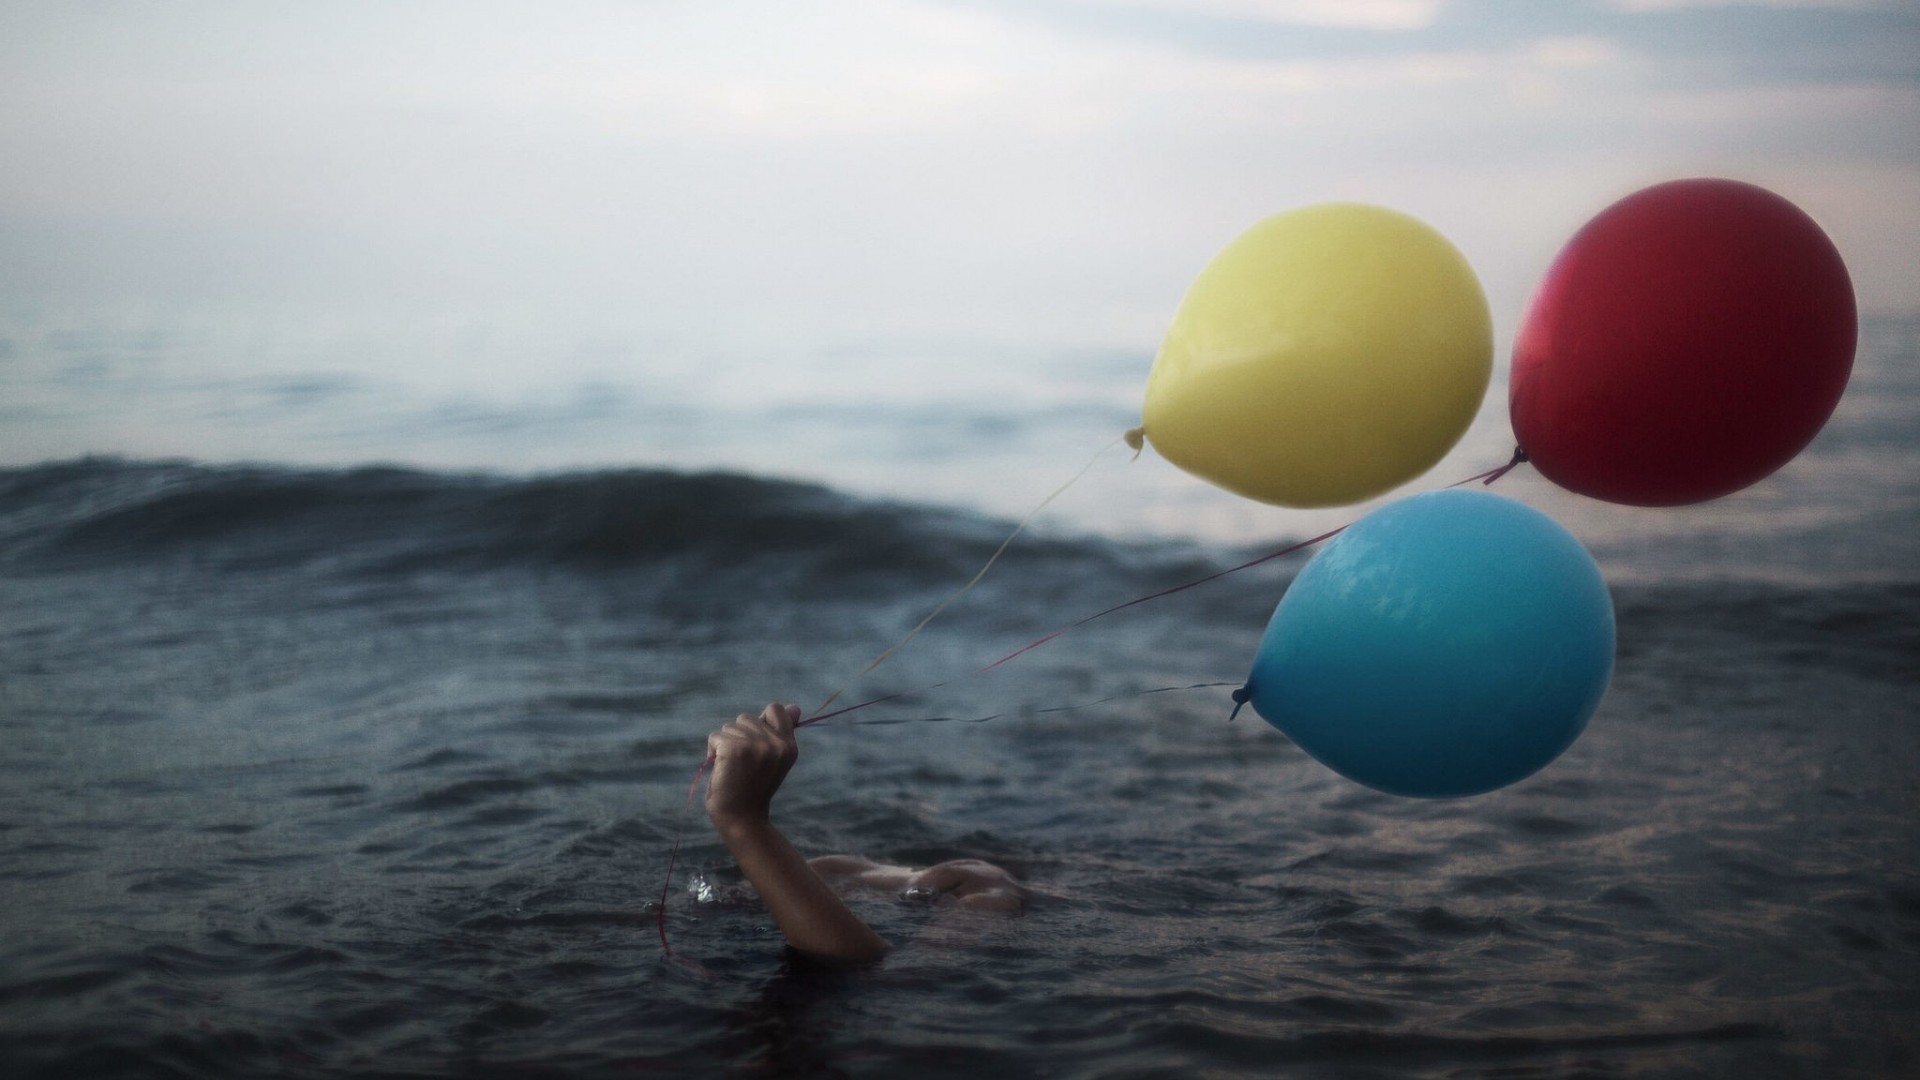 General 1920x1080 hands balloon water sea swimming waves yellow red blue in water